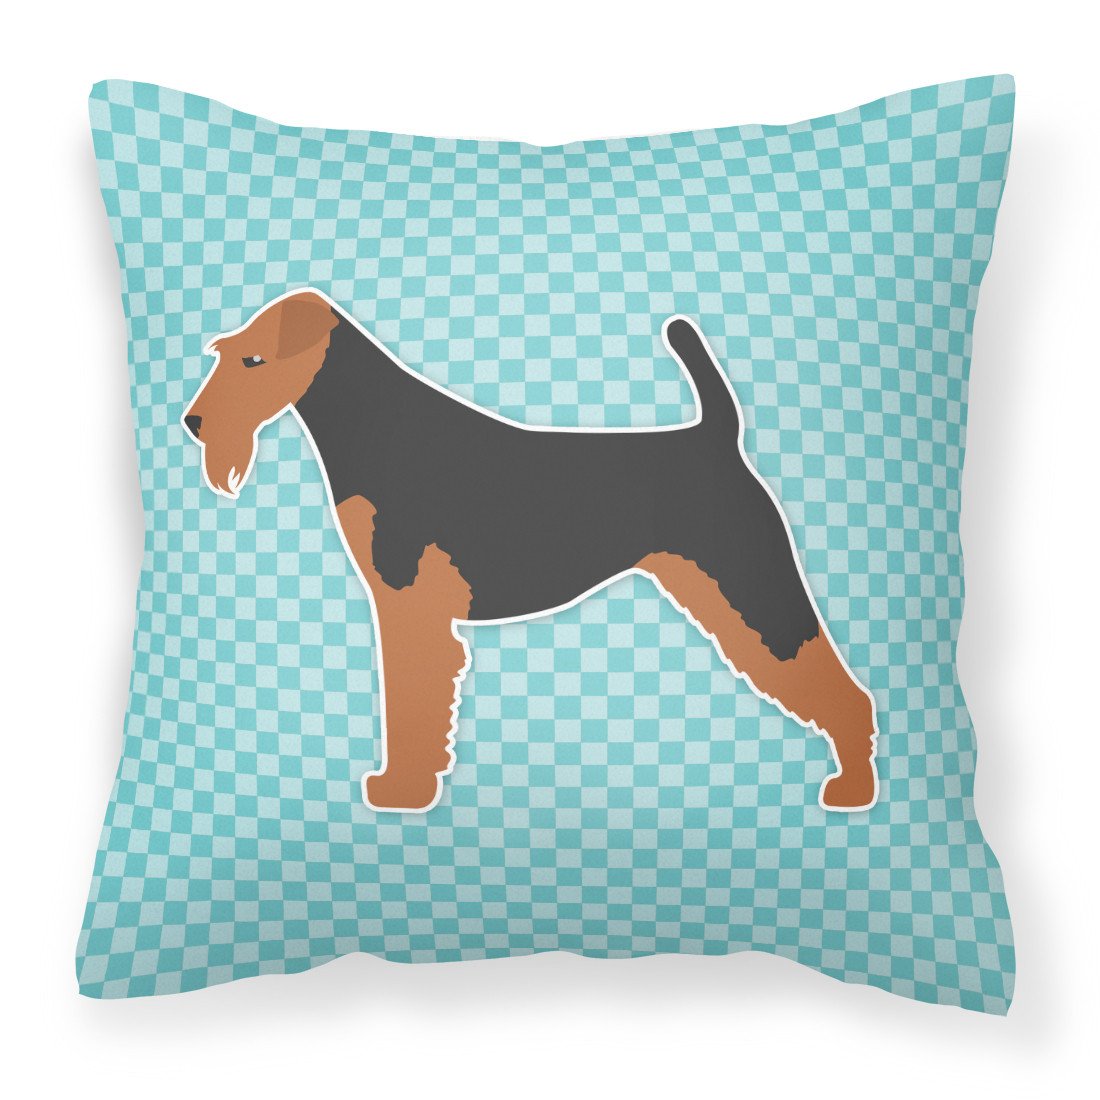 Welsh Terrier  Checkerboard Blue Fabric Decorative Pillow BB3685PW1818 by Caroline's Treasures